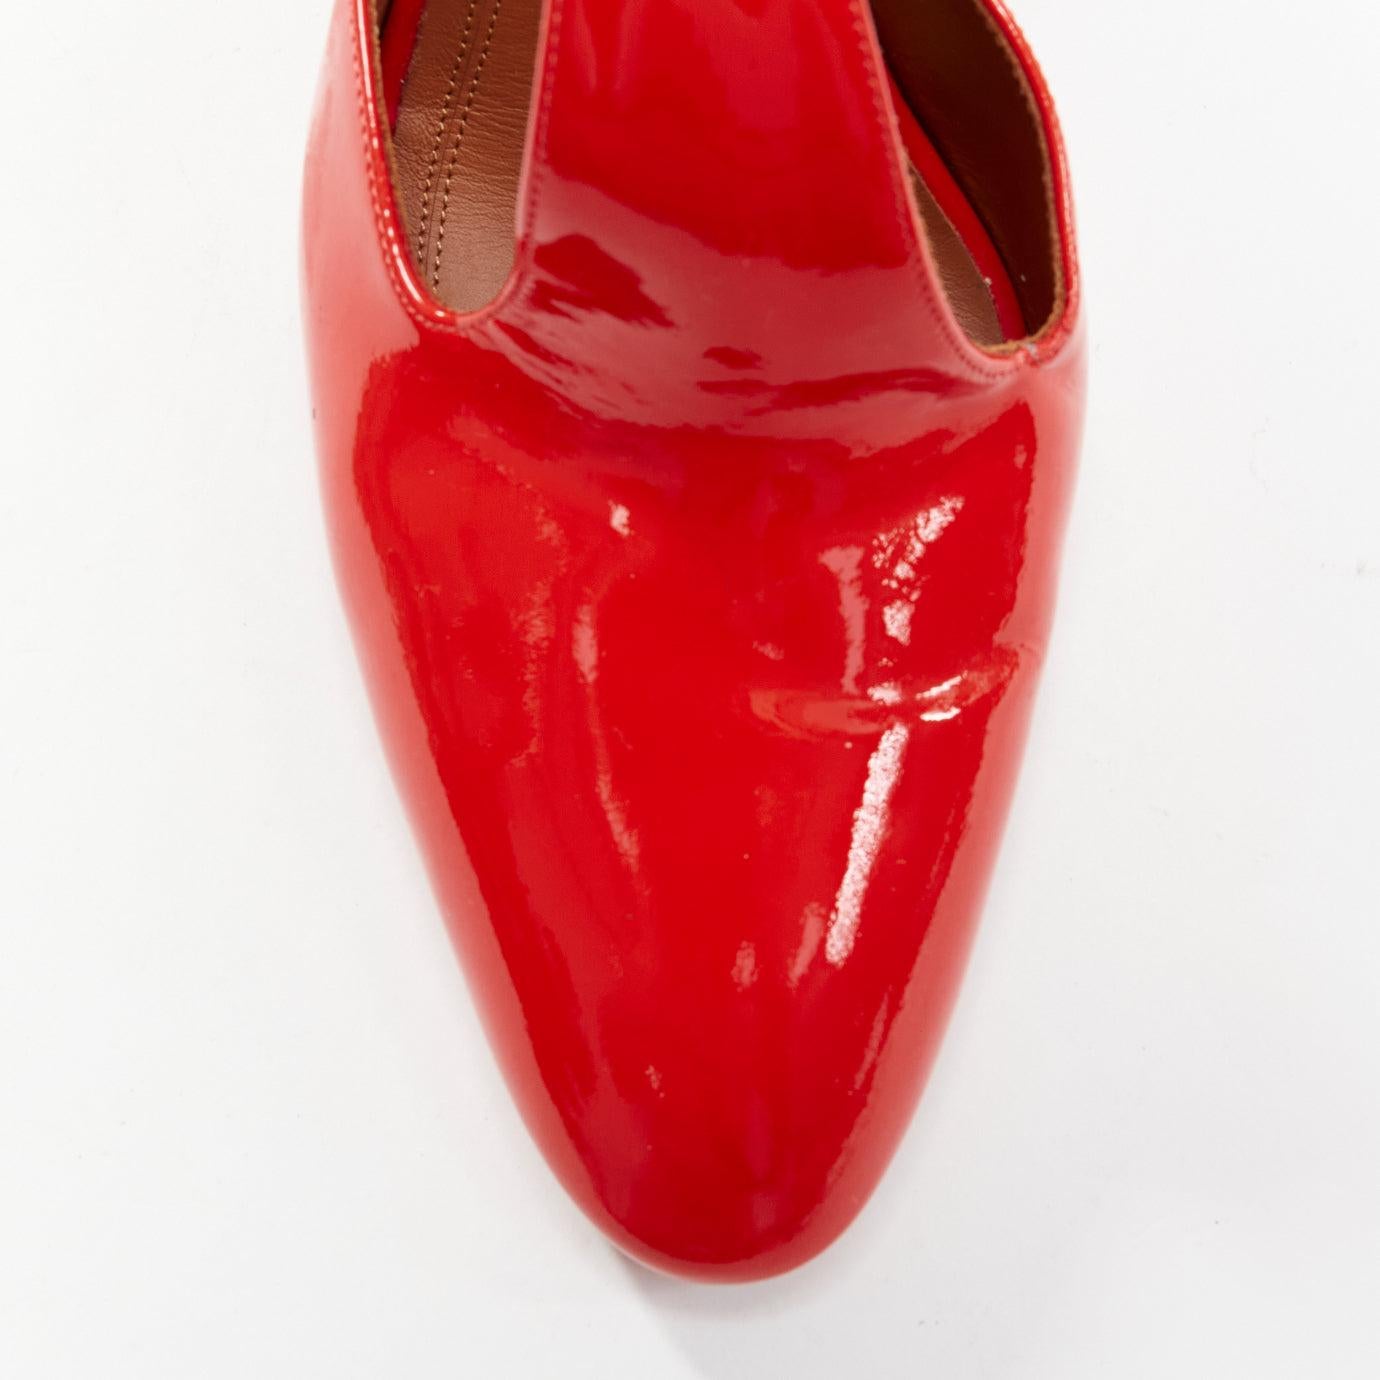 OLD CELINE Phoebe Philo Tango red patent crystal t-strap heels EU38 For Sale 1